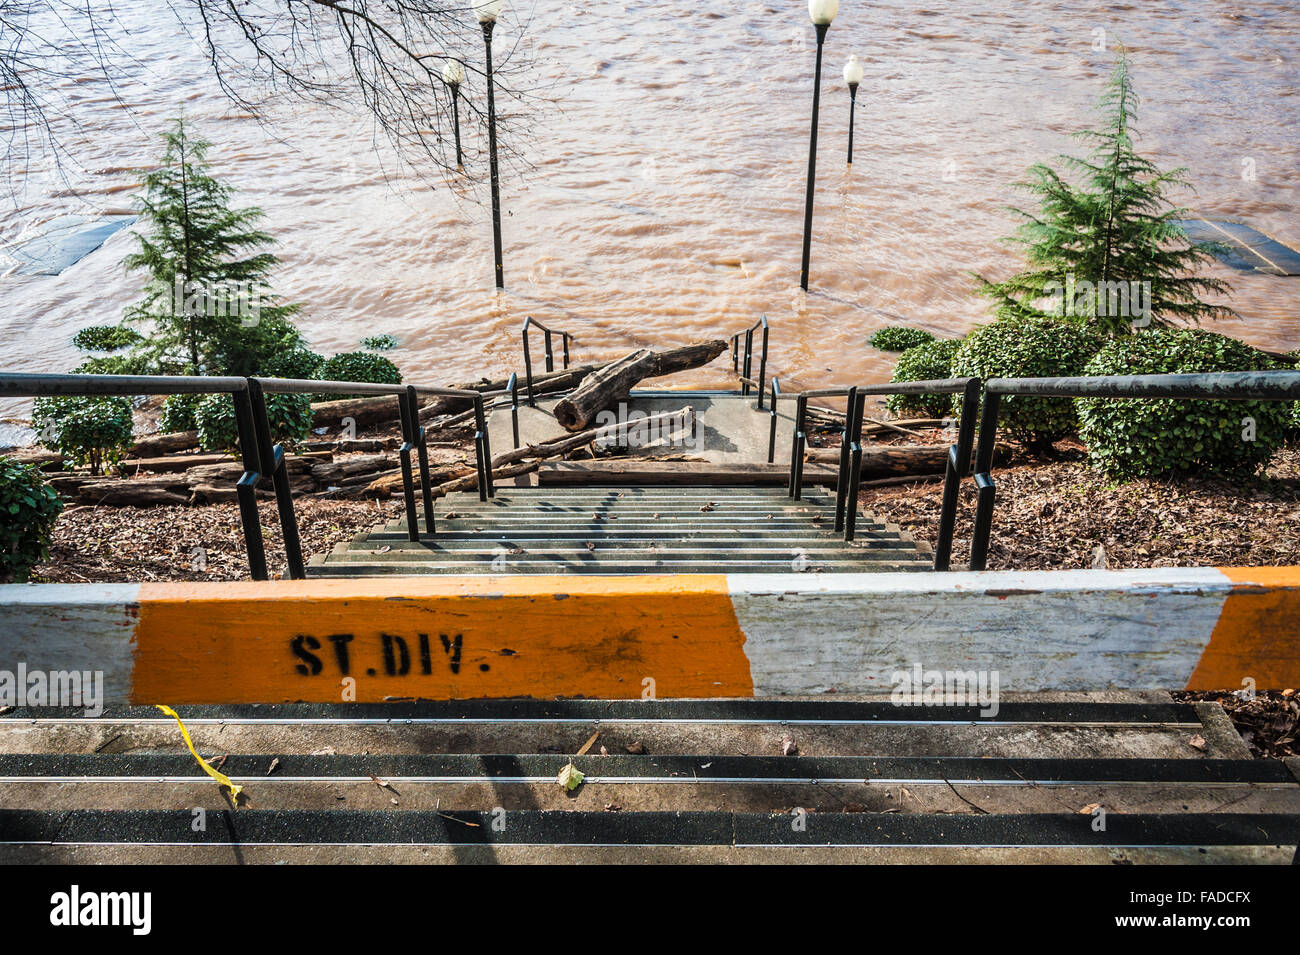 Flood waters of the Chattahoochee River submerge the Riverwalk area along downtown Columbus, Georgia during 2015 flood. Stock Photo